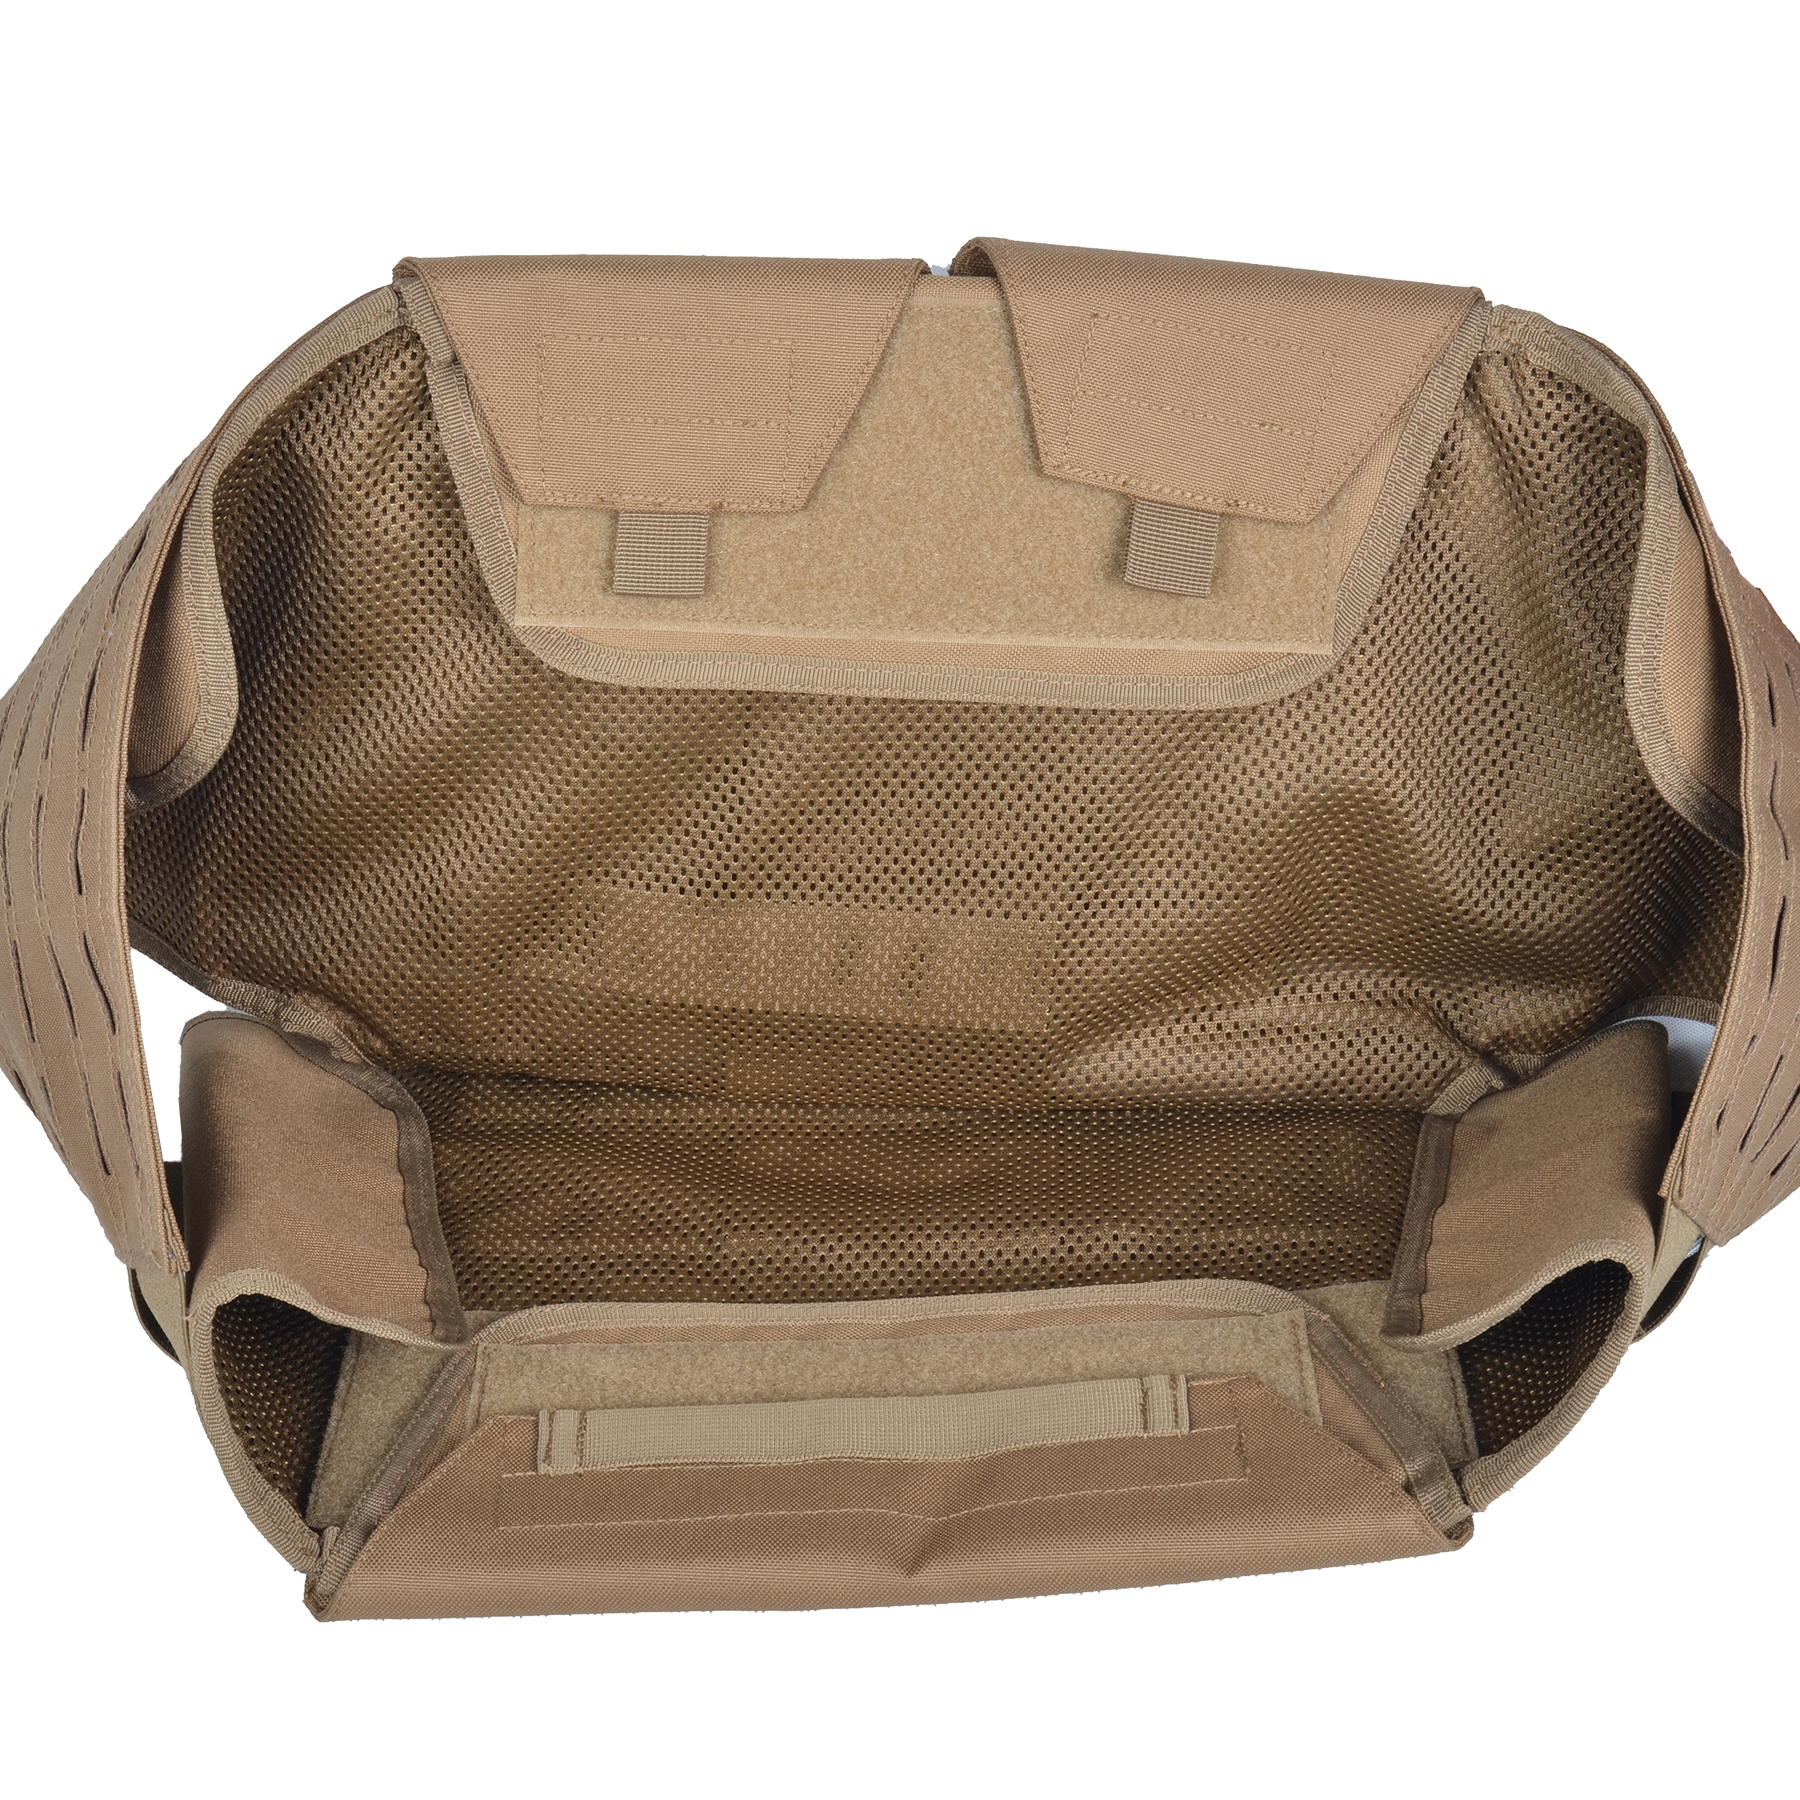 Squadron Plate Carrier-6925